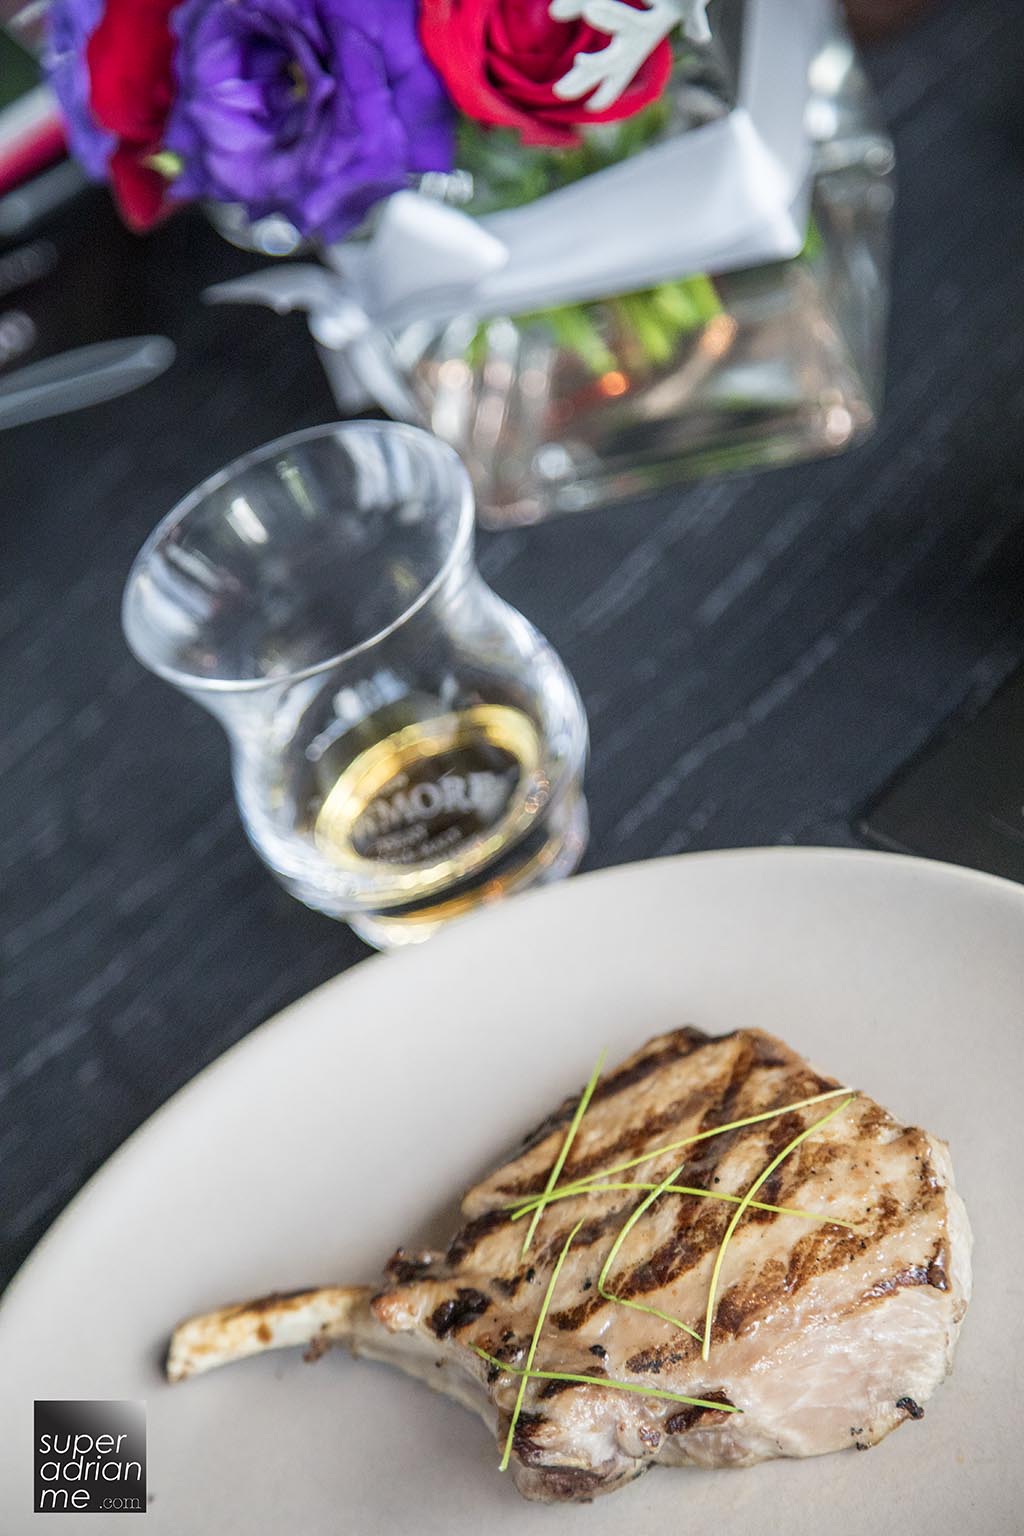 Bowmore 15 Year Old: Golden and Elegant paired with Pork Chop at ADRIFT by David Myers